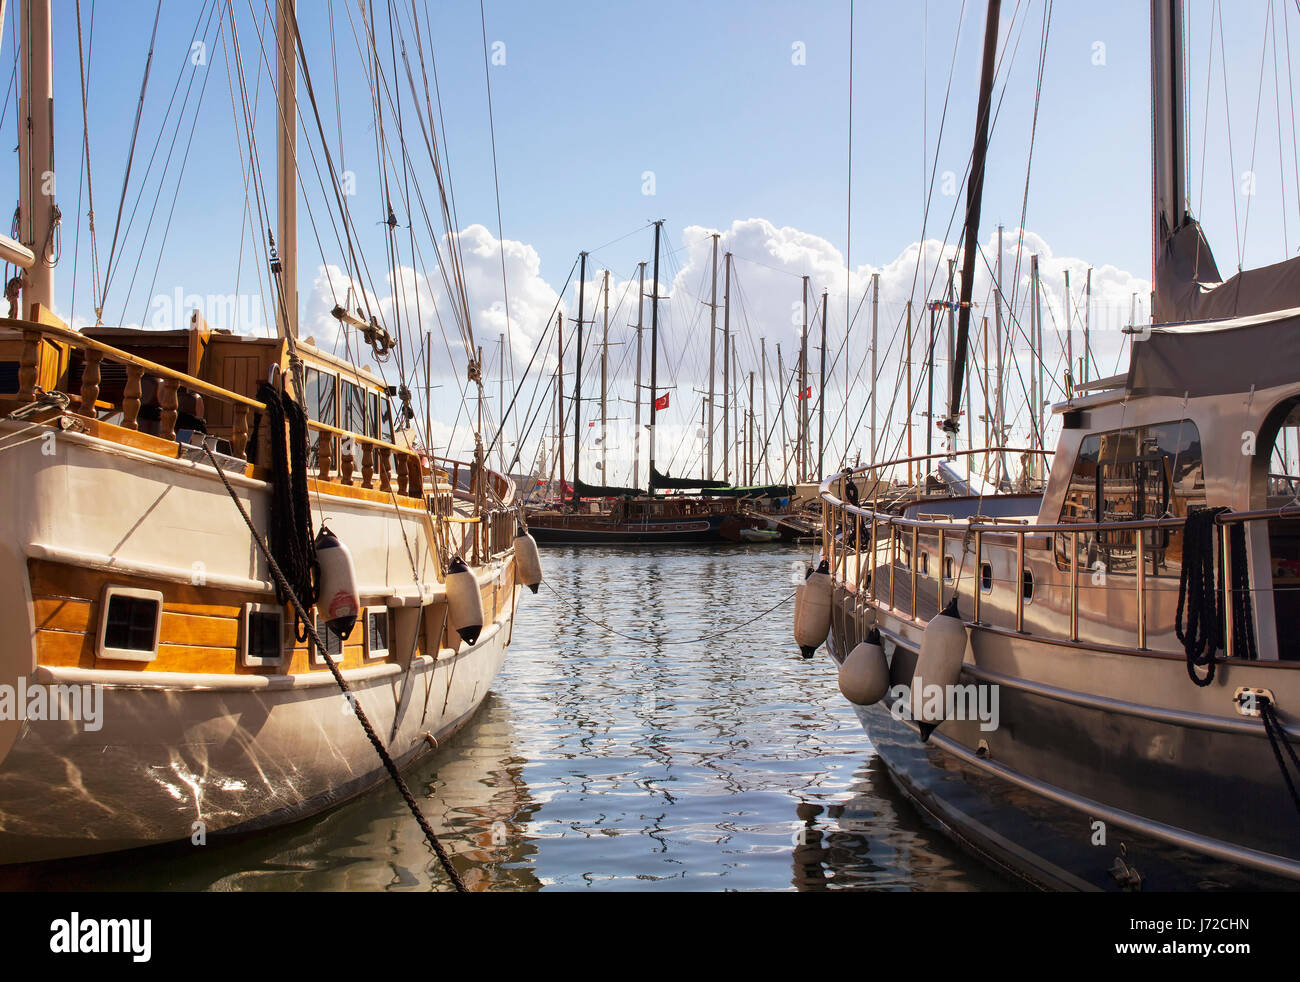 View of wooden yachts parked at Bodrum marina in a calm autumn day. Stock Photo